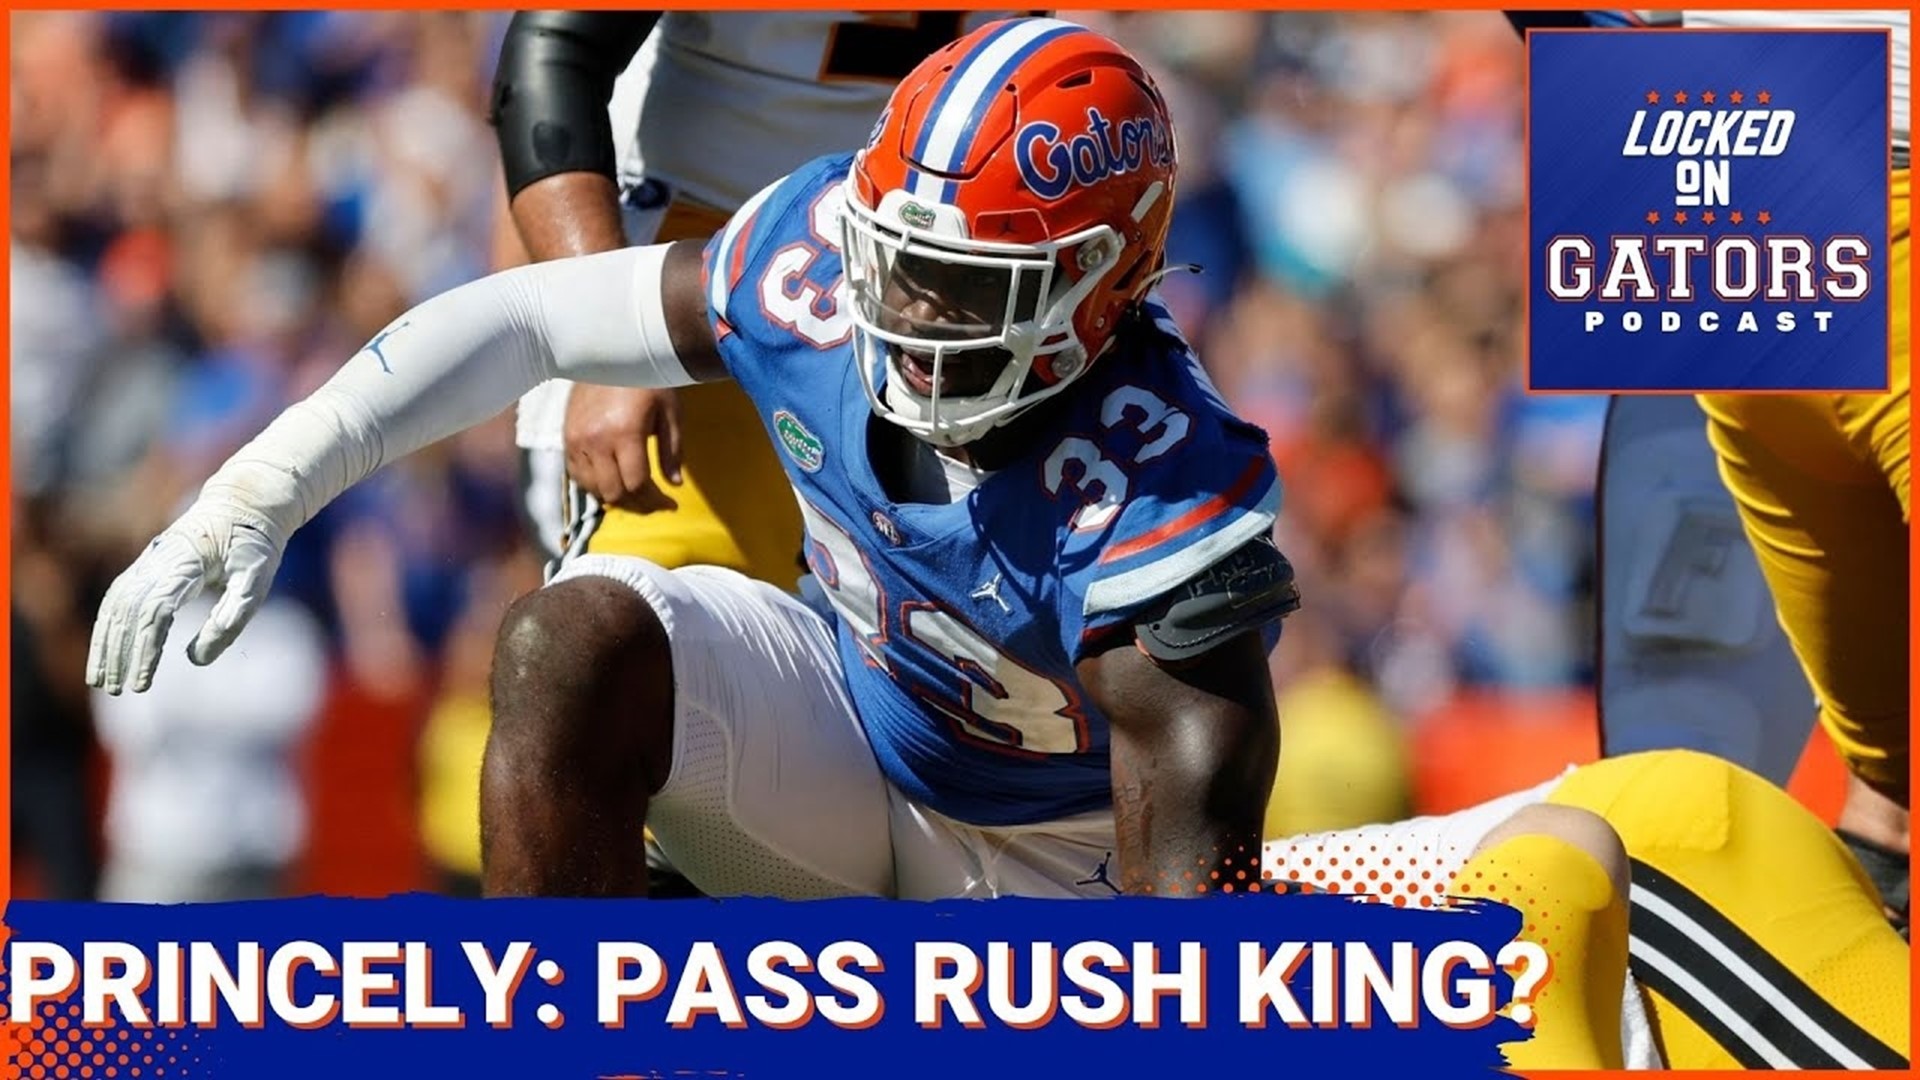 The Florida Gators under head coach Billy Napier + defensive coordinator Austin Armstrong could have a breakout superstar on their roster in EDGE Princely Umanmielen